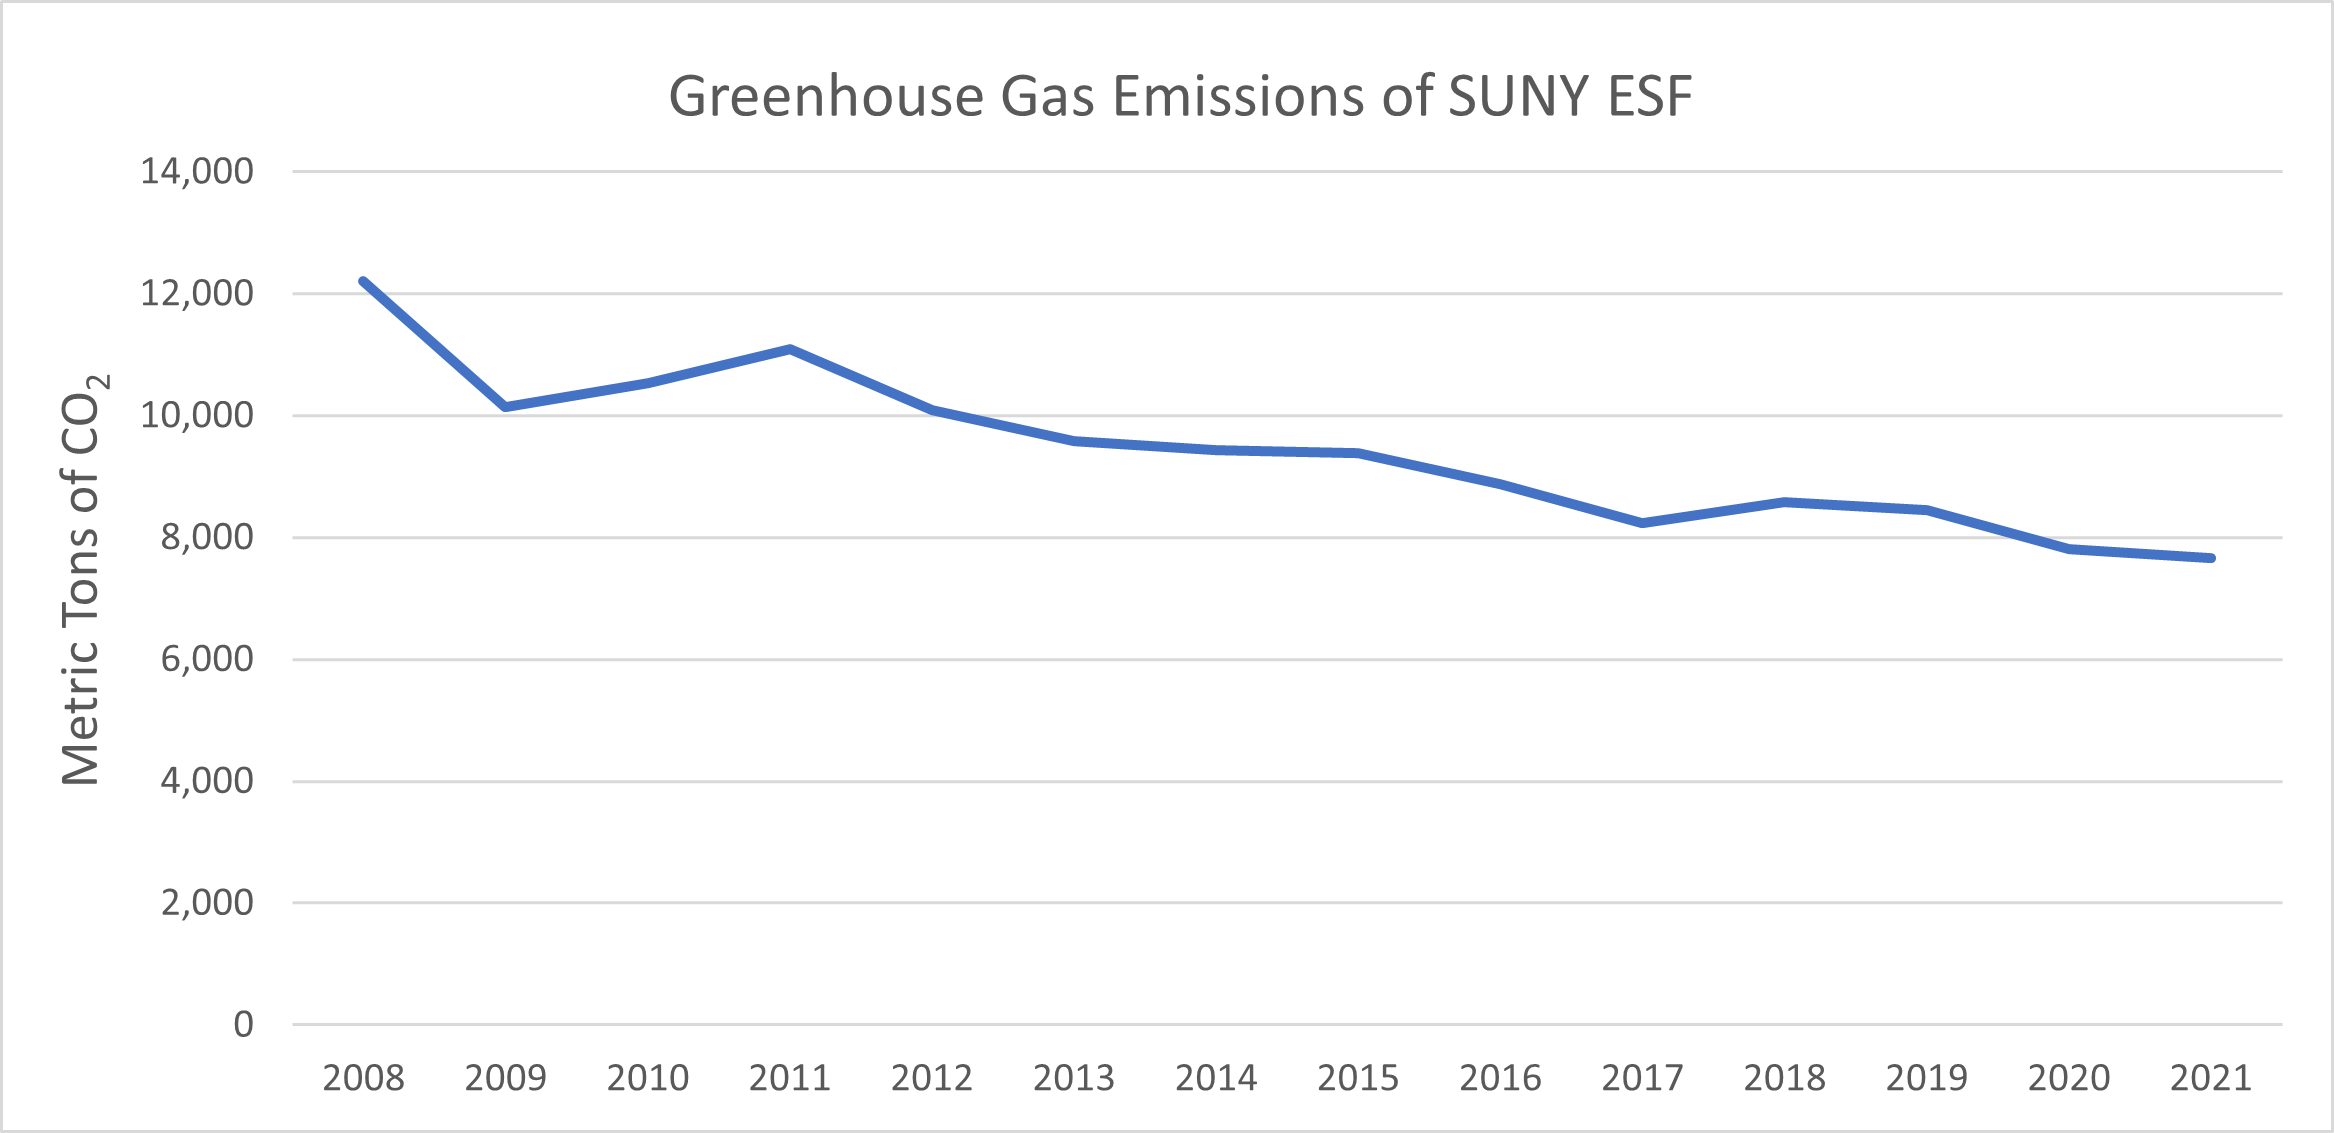 a graph chart of greenhouse gas emissions of E S F. The x-axis is the year intervals and y-axis is the metric tons of carbon dioxide.